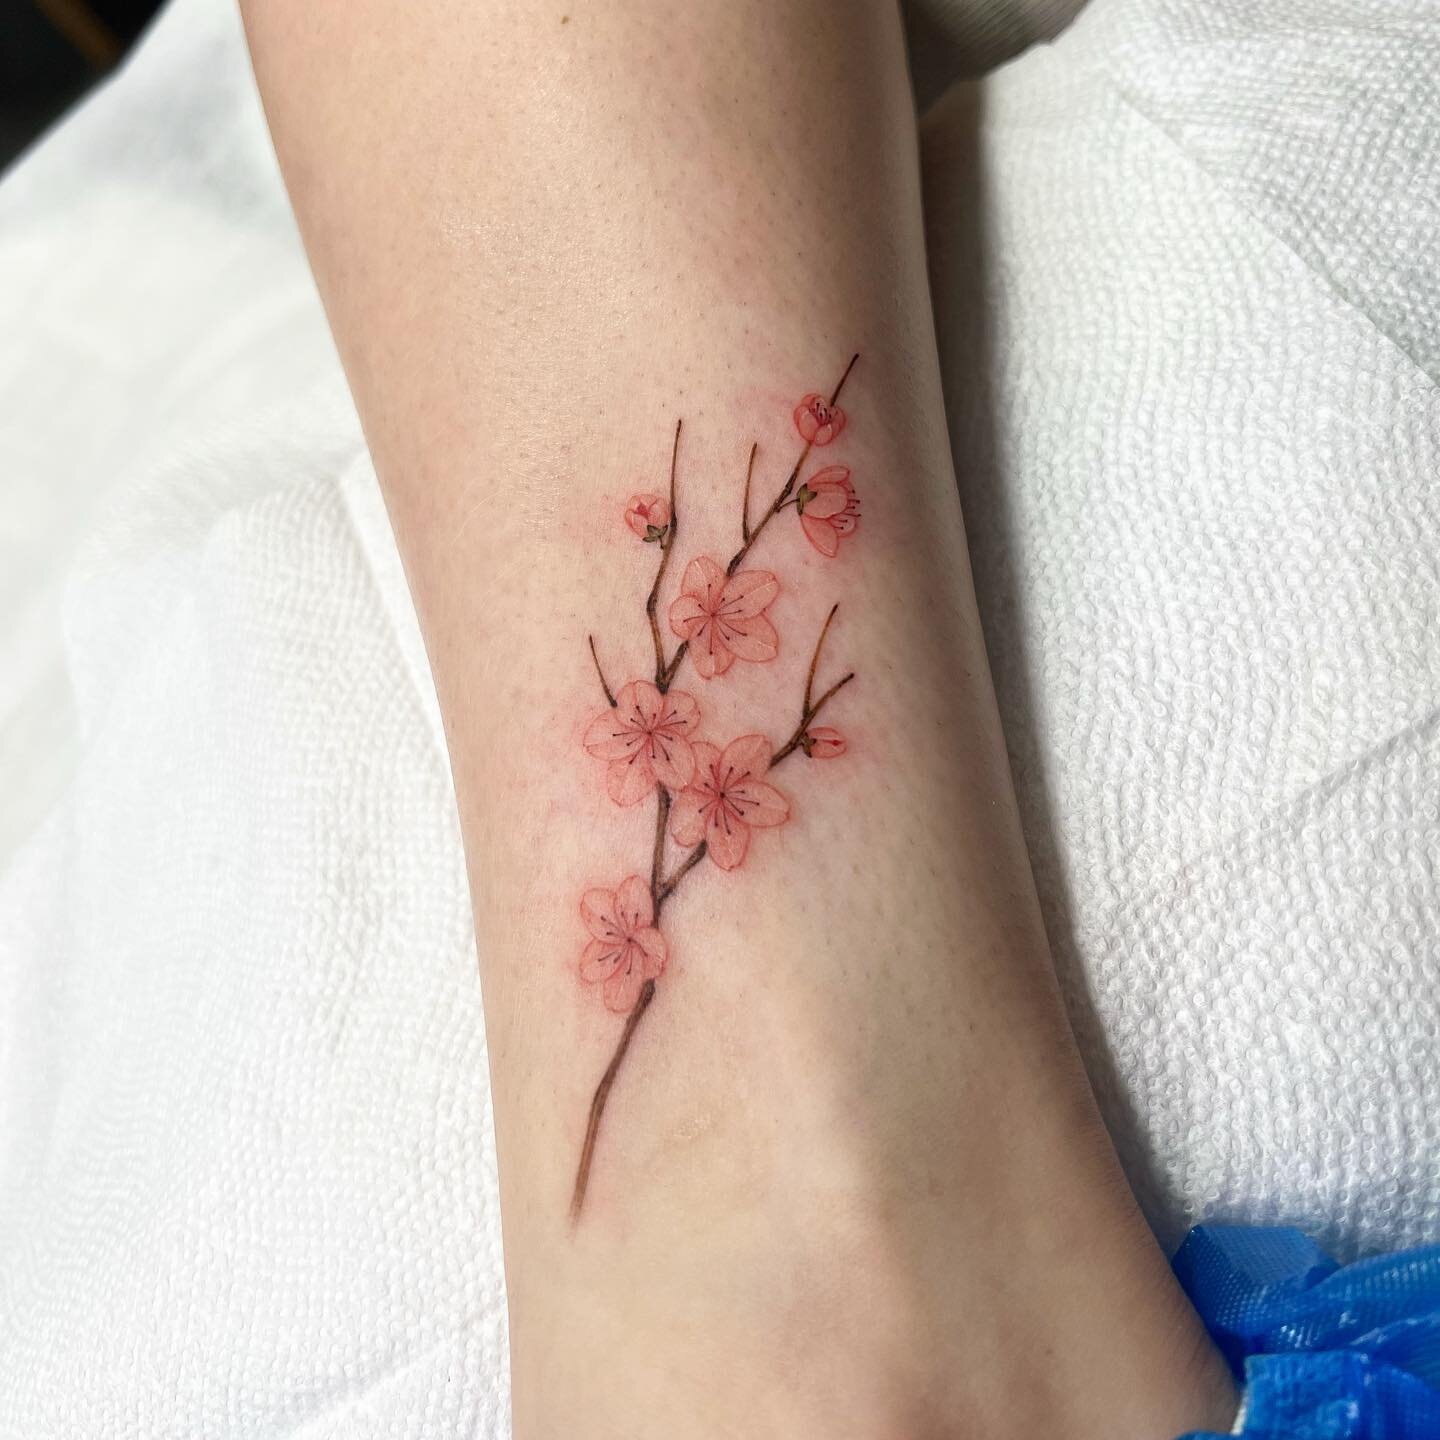 Cherry blossoms in a perfect season done by @jingstattoo 
#floraltattoo #flowers #tattoo #tattoos #ankletattpo #cherryblossoms #nyctattoo #nyctattooartist #finelinetattoo